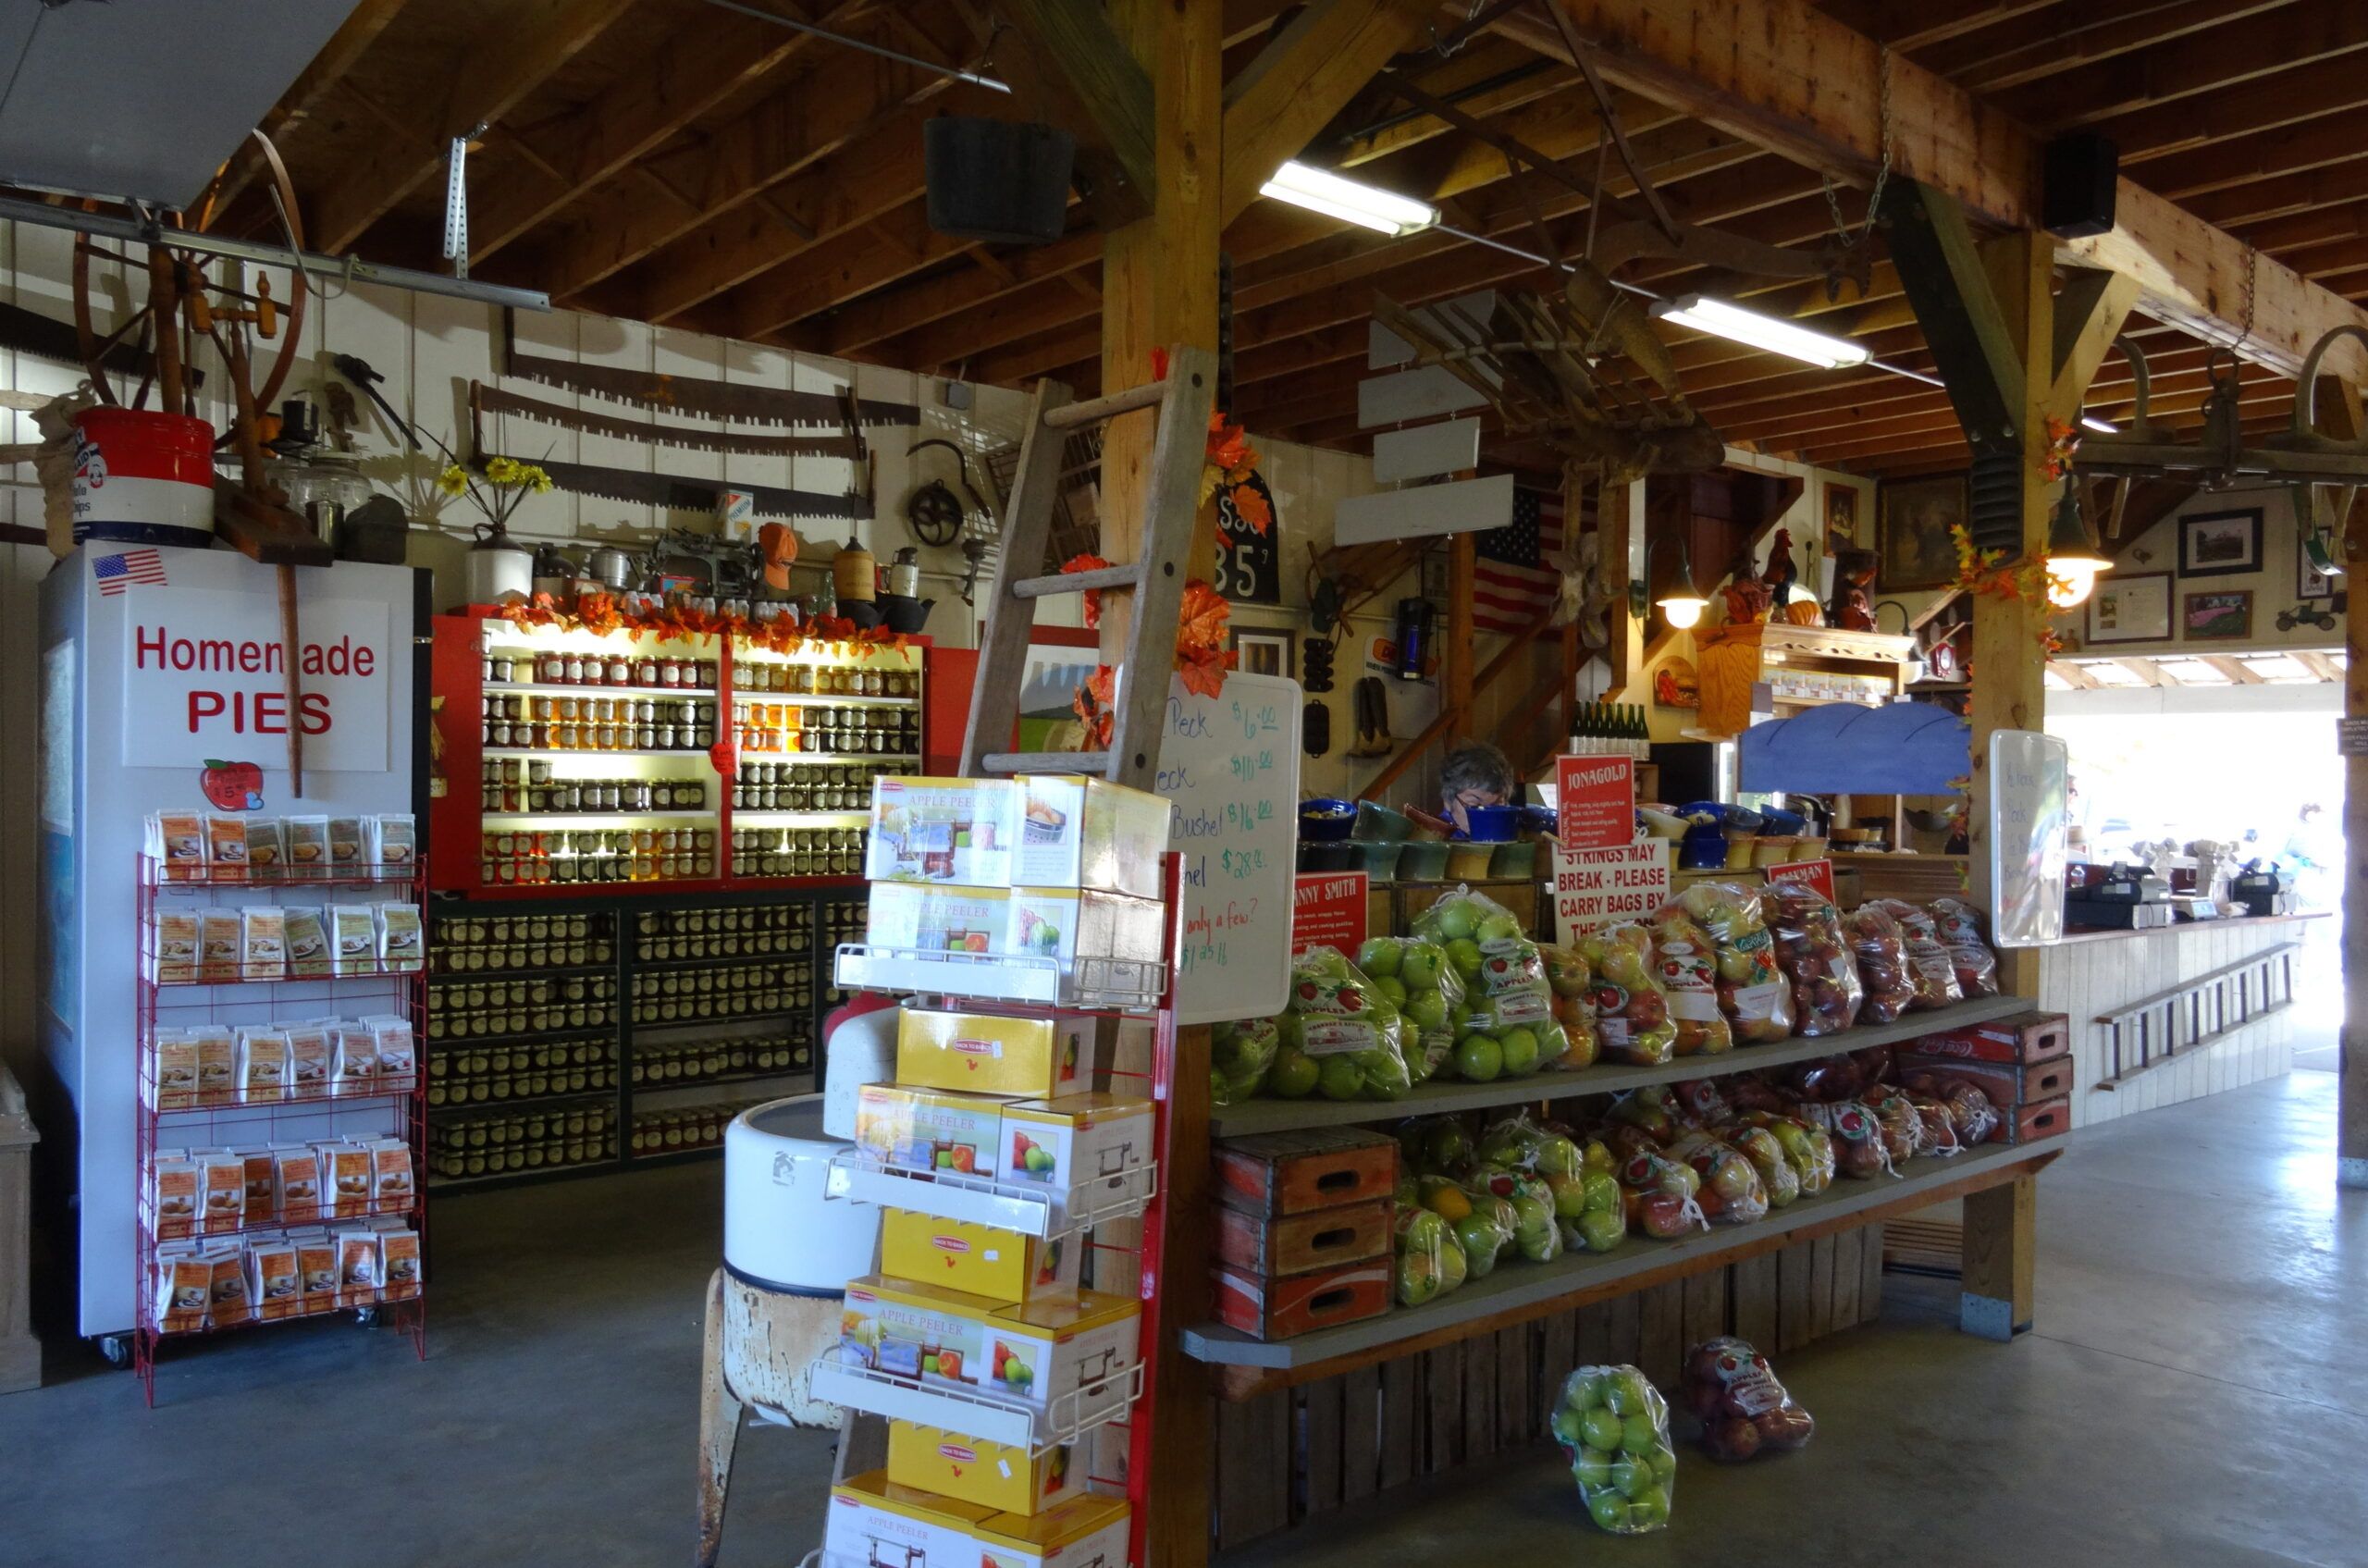 The store at the apple orchard was fully stocked not only with apples but pies, peelers, jams and jellies.